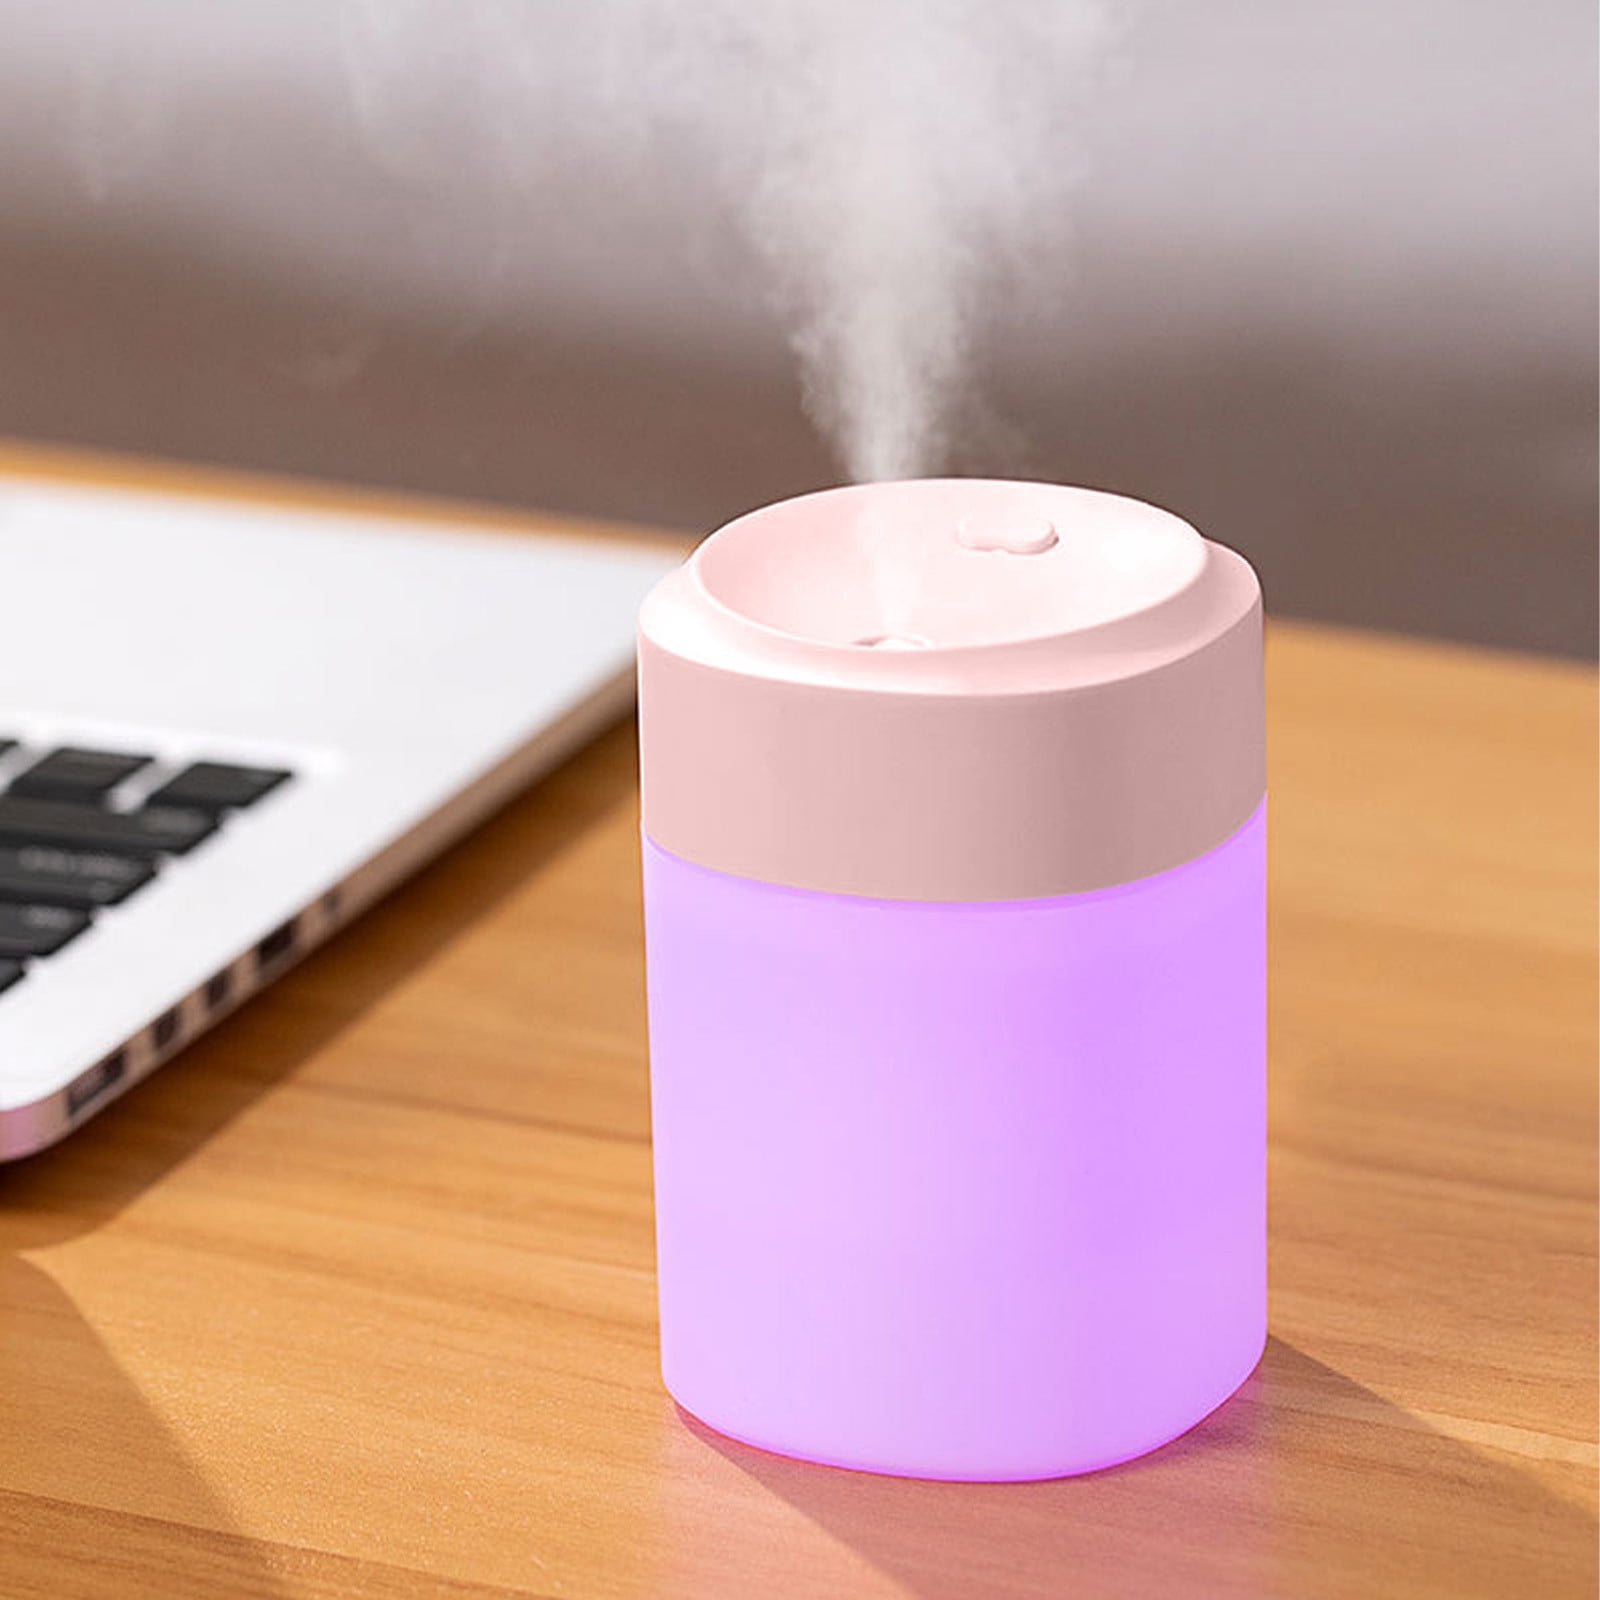 2023 Summer Home and Kitchen Gadgets Savings Clearance! WJSXC Portable Desk  Humidifier, Cool Mist Humidifier, Small Humidifier for Home Bedroom office,  Plants, Colorful Night Light Function Pink 